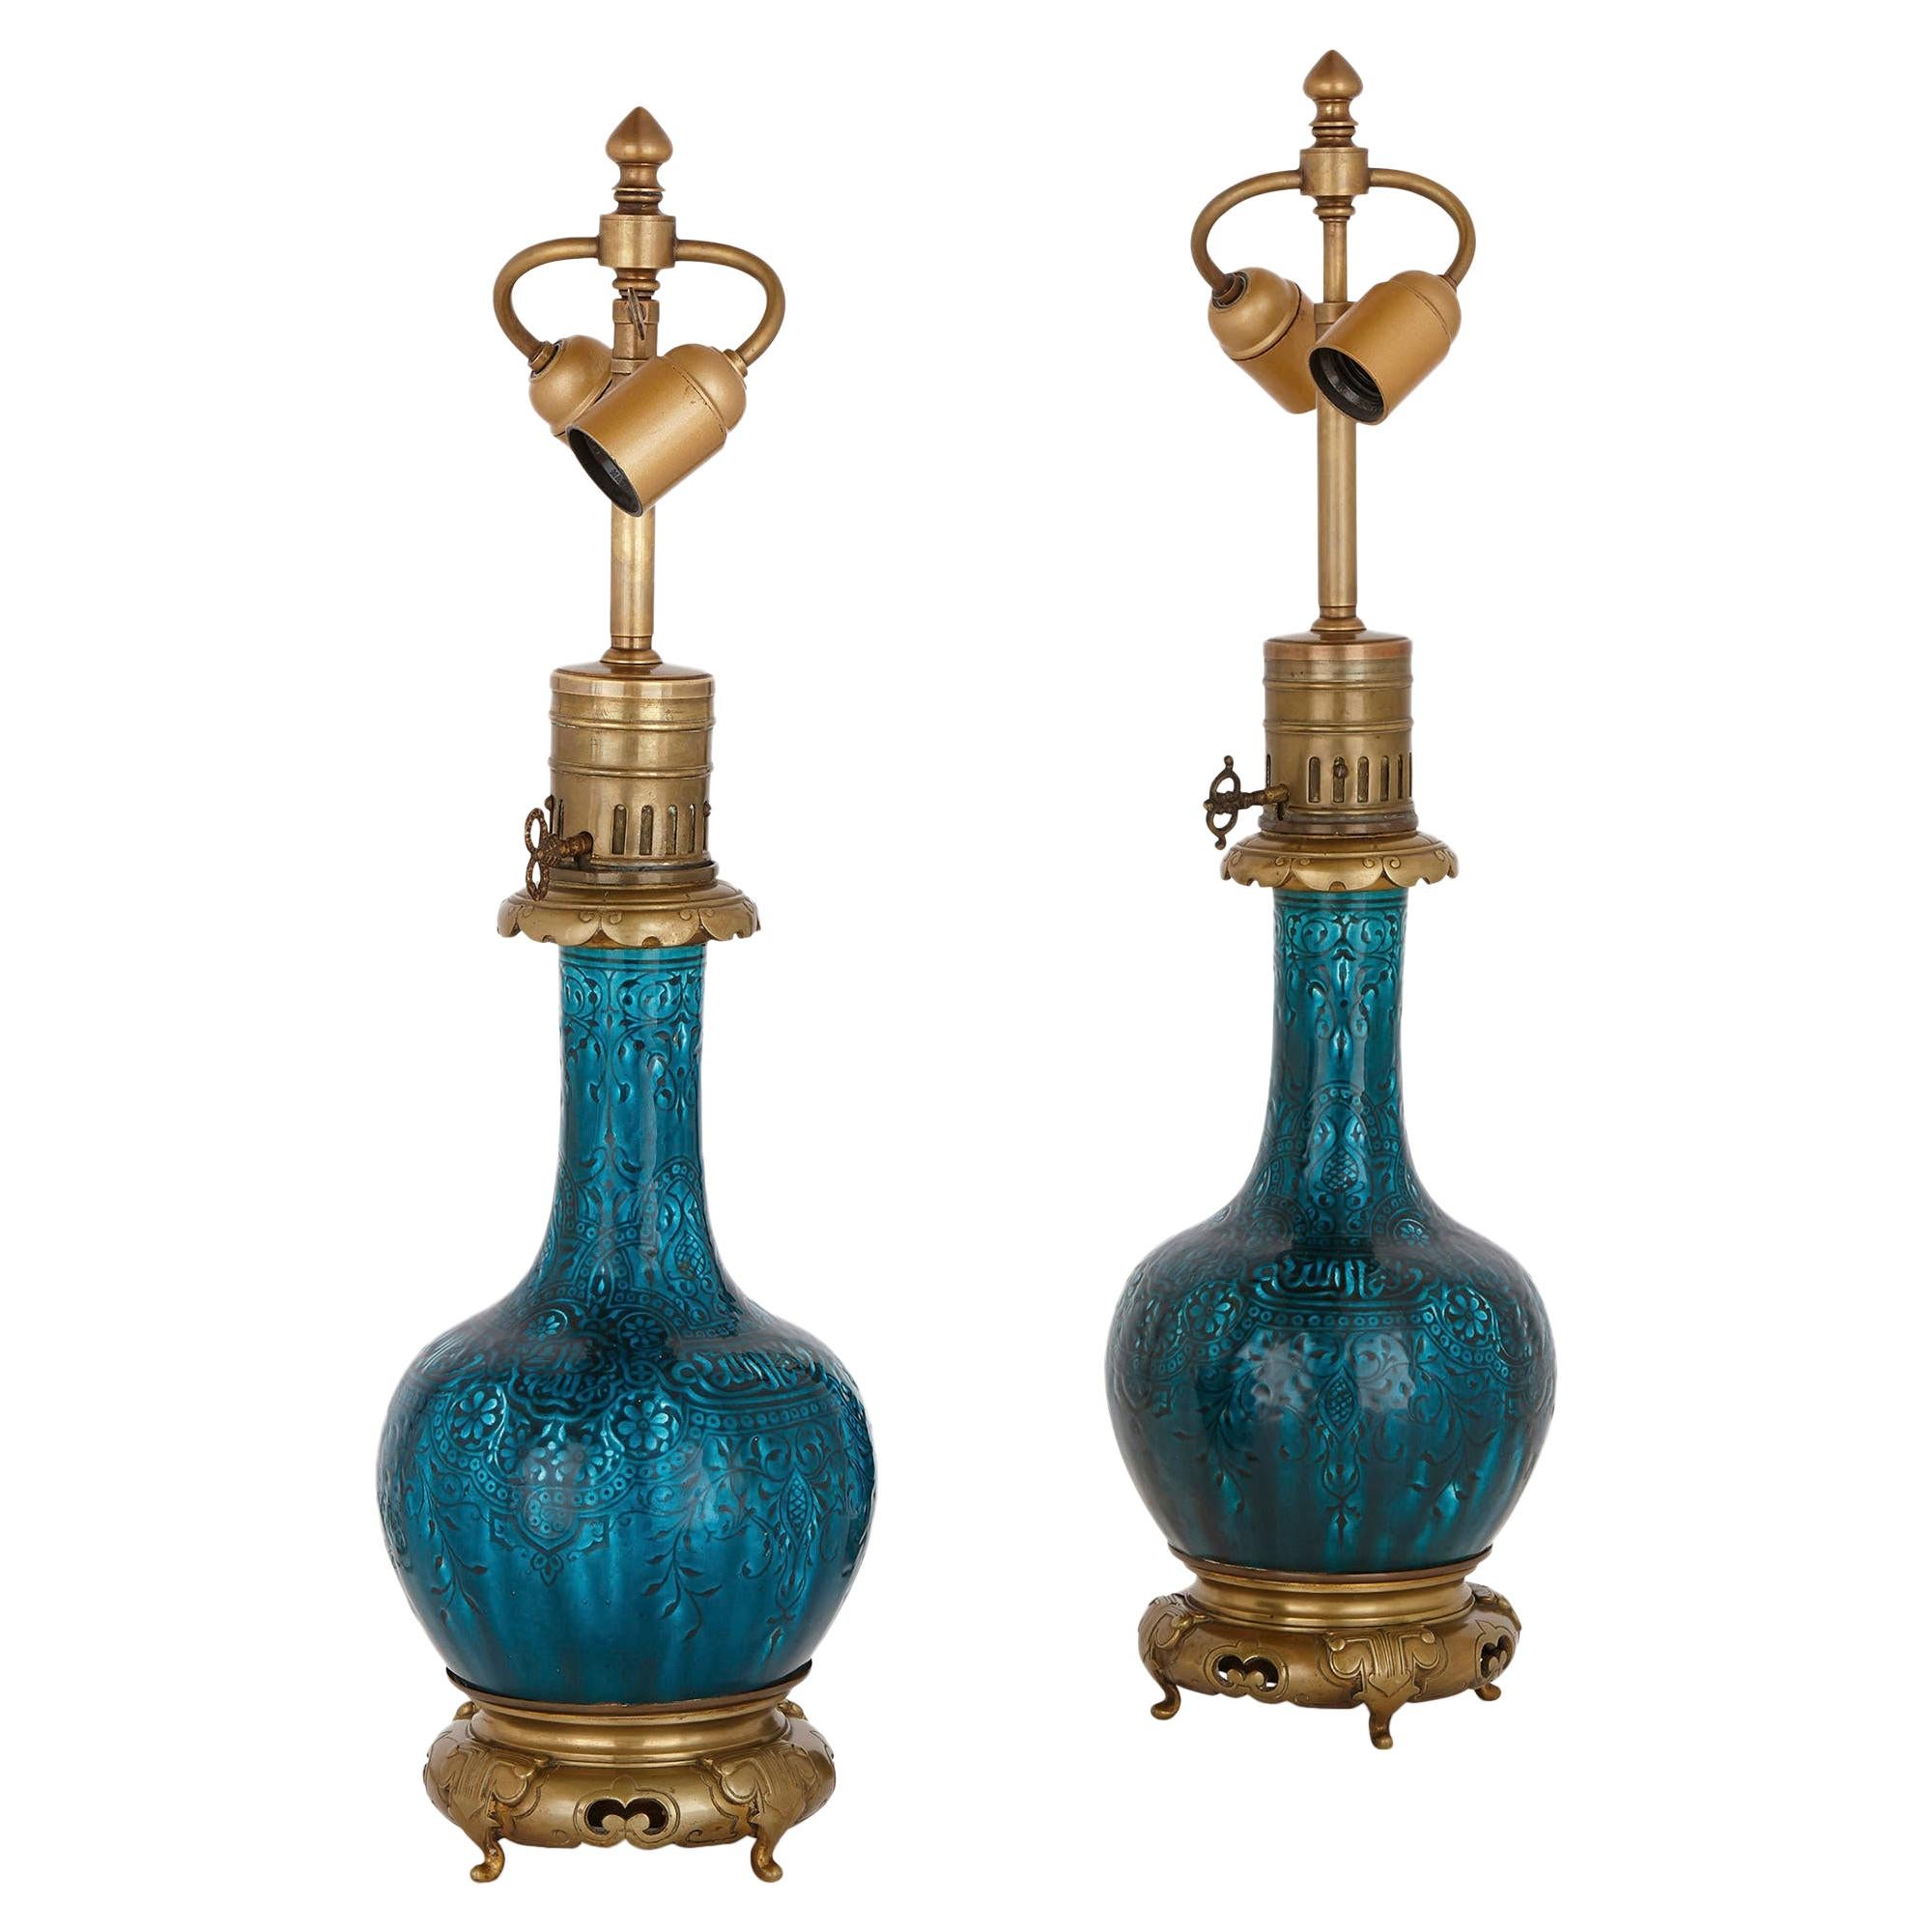 Pair of Gilt Bronze and Faience Lamps, Attributed to Théodore Deck